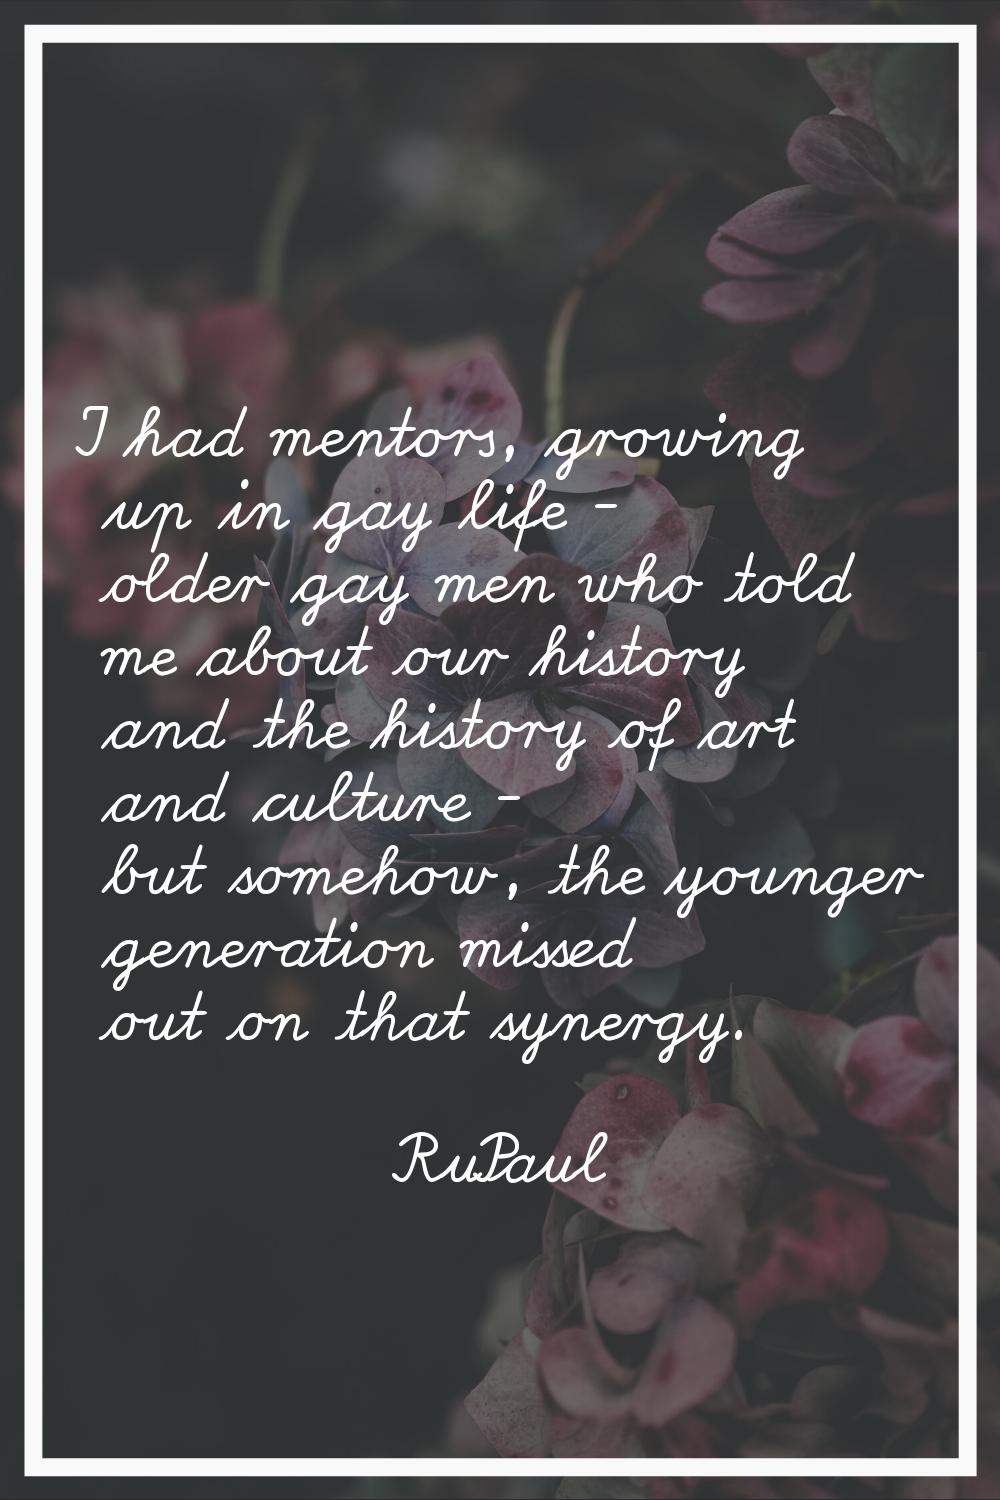 I had mentors, growing up in gay life - older gay men who told me about our history and the history